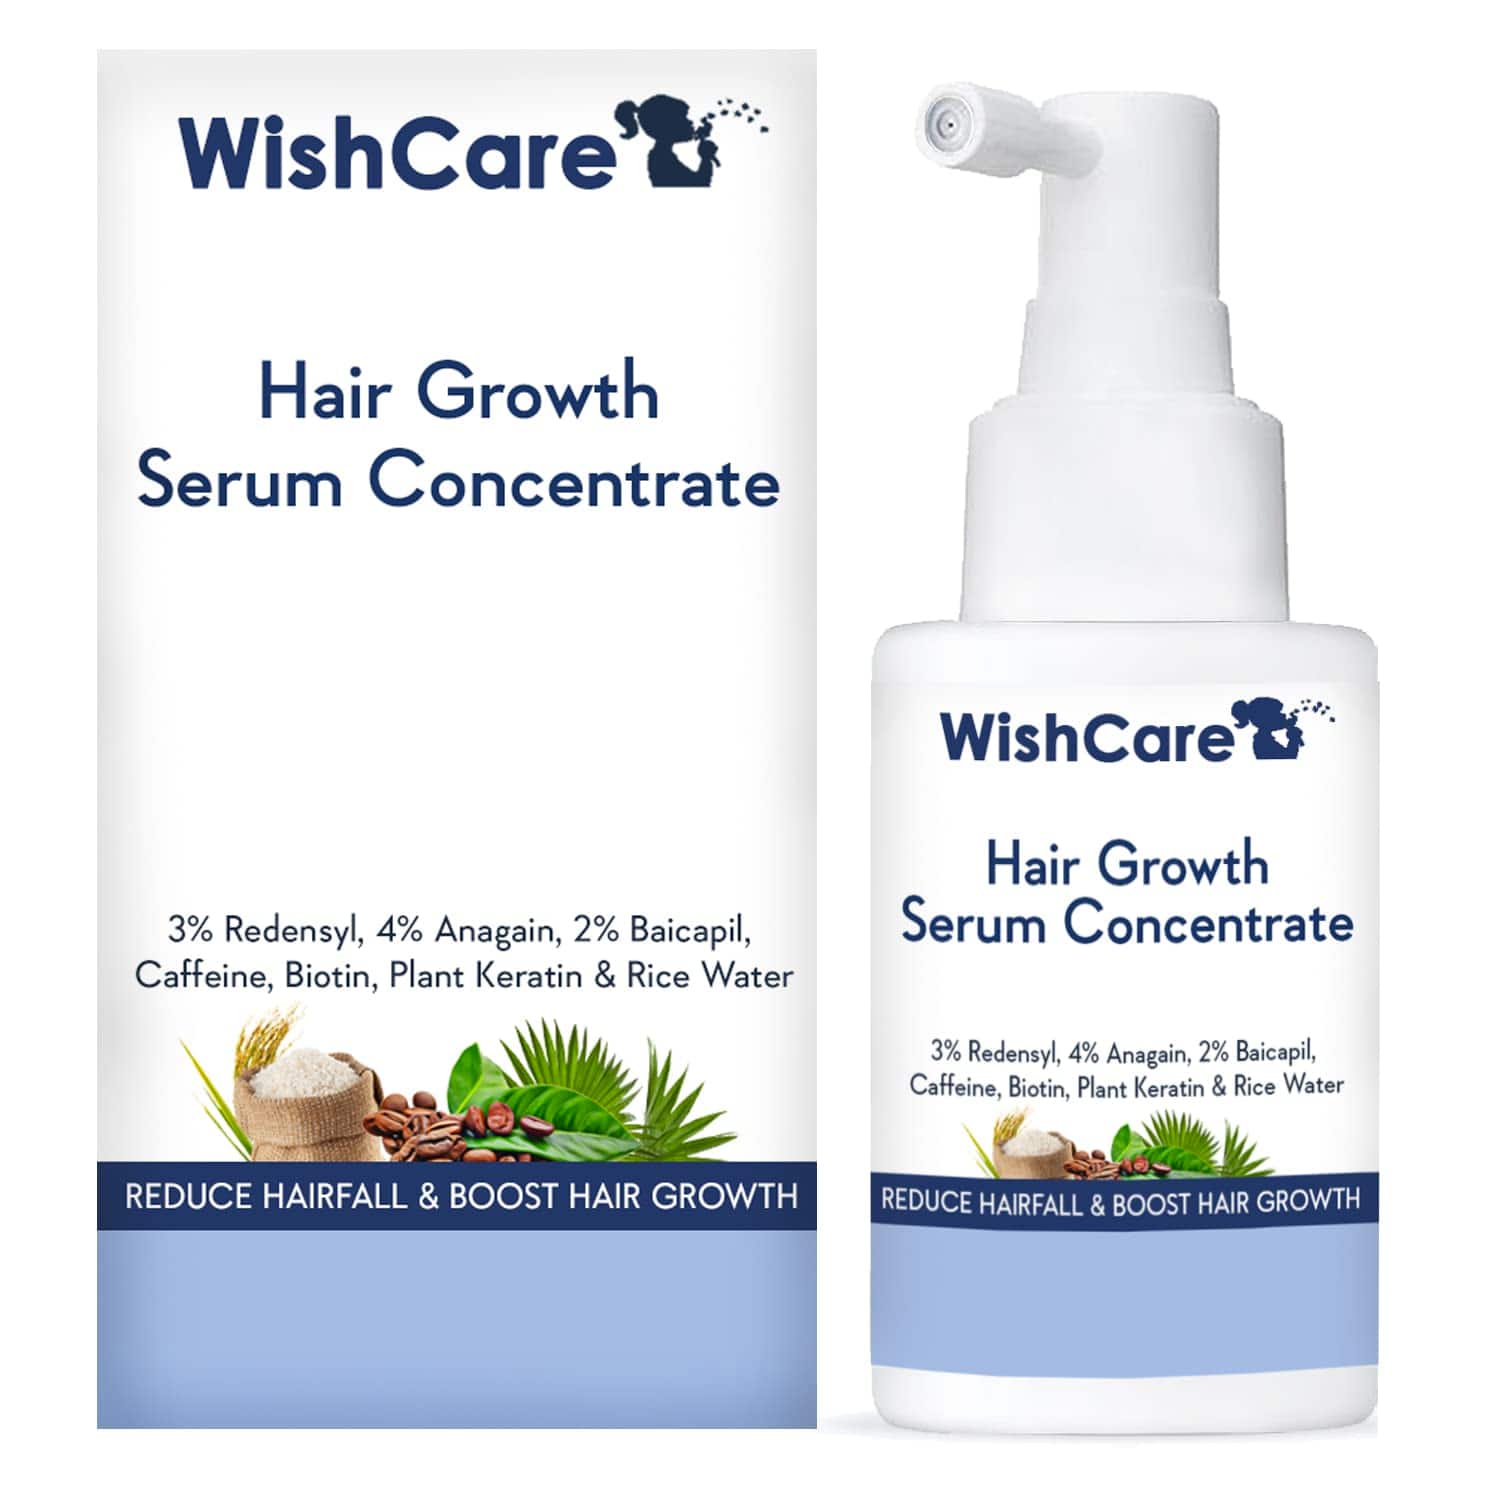 WishCare Hair Growth Serum Concentrate - Hair Growth Serum for Men & Women